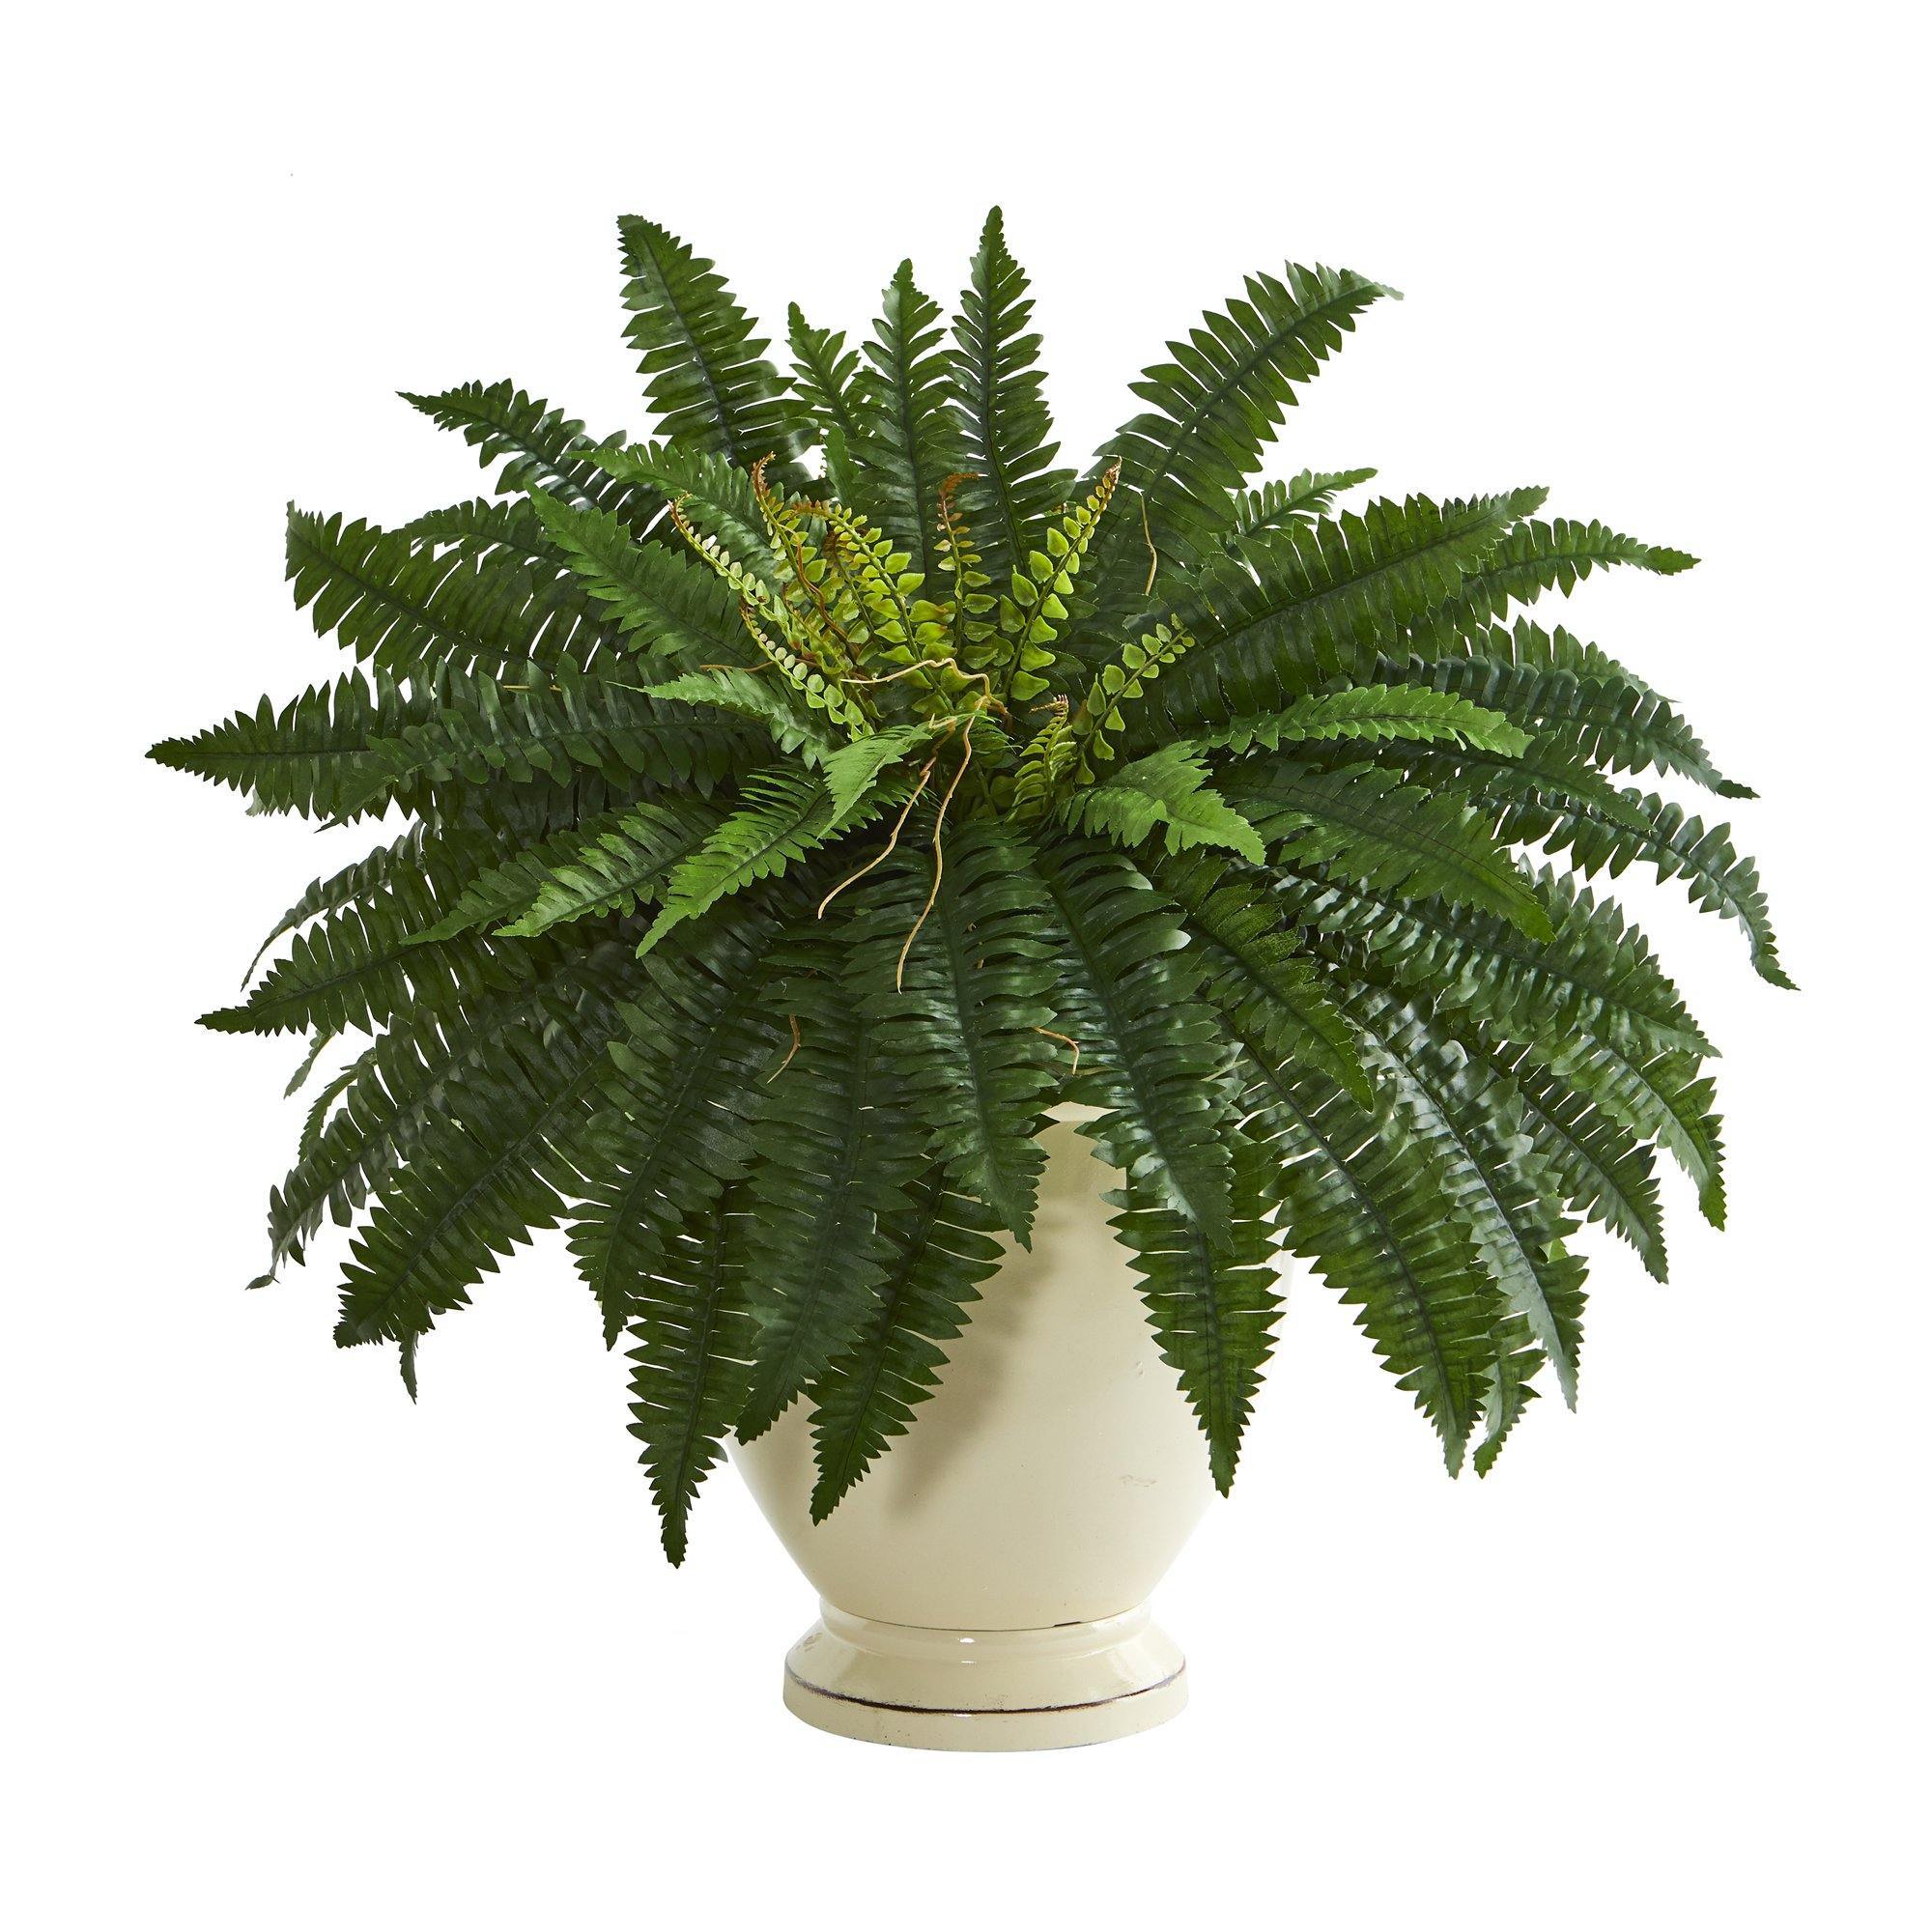 Artificial Ferns For Outdoors - Mary Blog